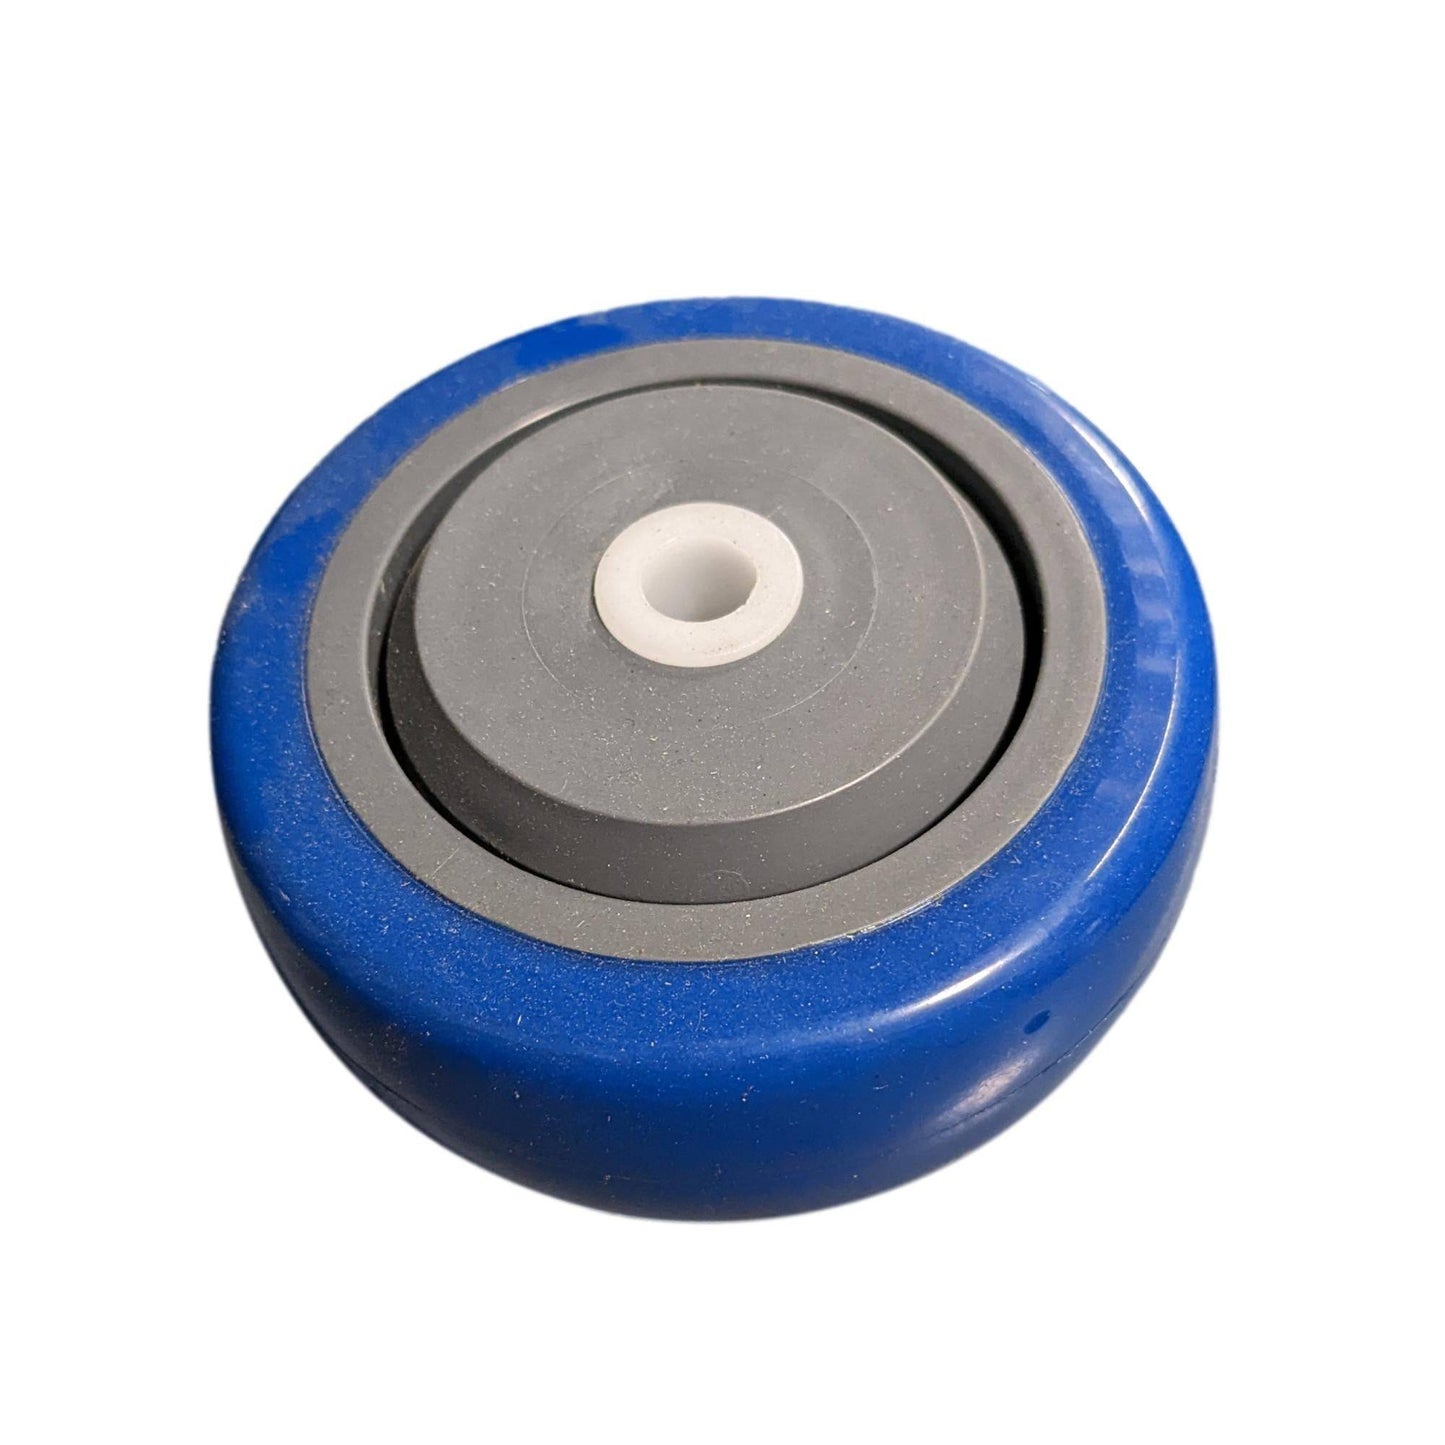 3-1/2" X 1-1/4" Poly-Pro Wheel - 300 lbs. Capacity - Durable Superior Casters